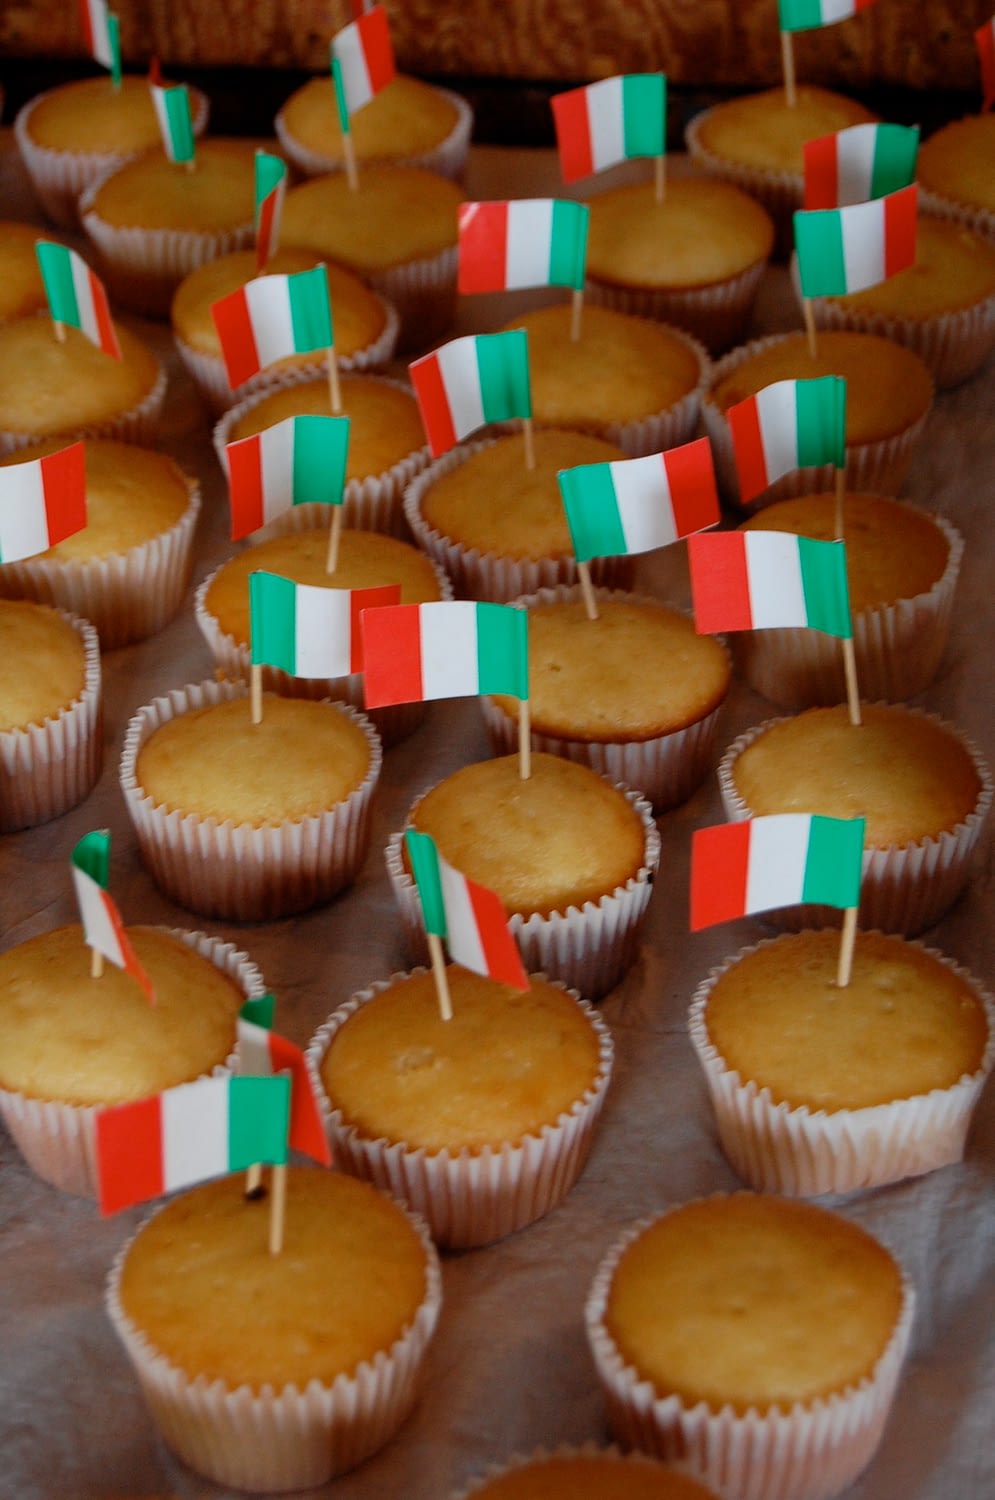 so simple! basic yellow cupcakes with Italian Flags.